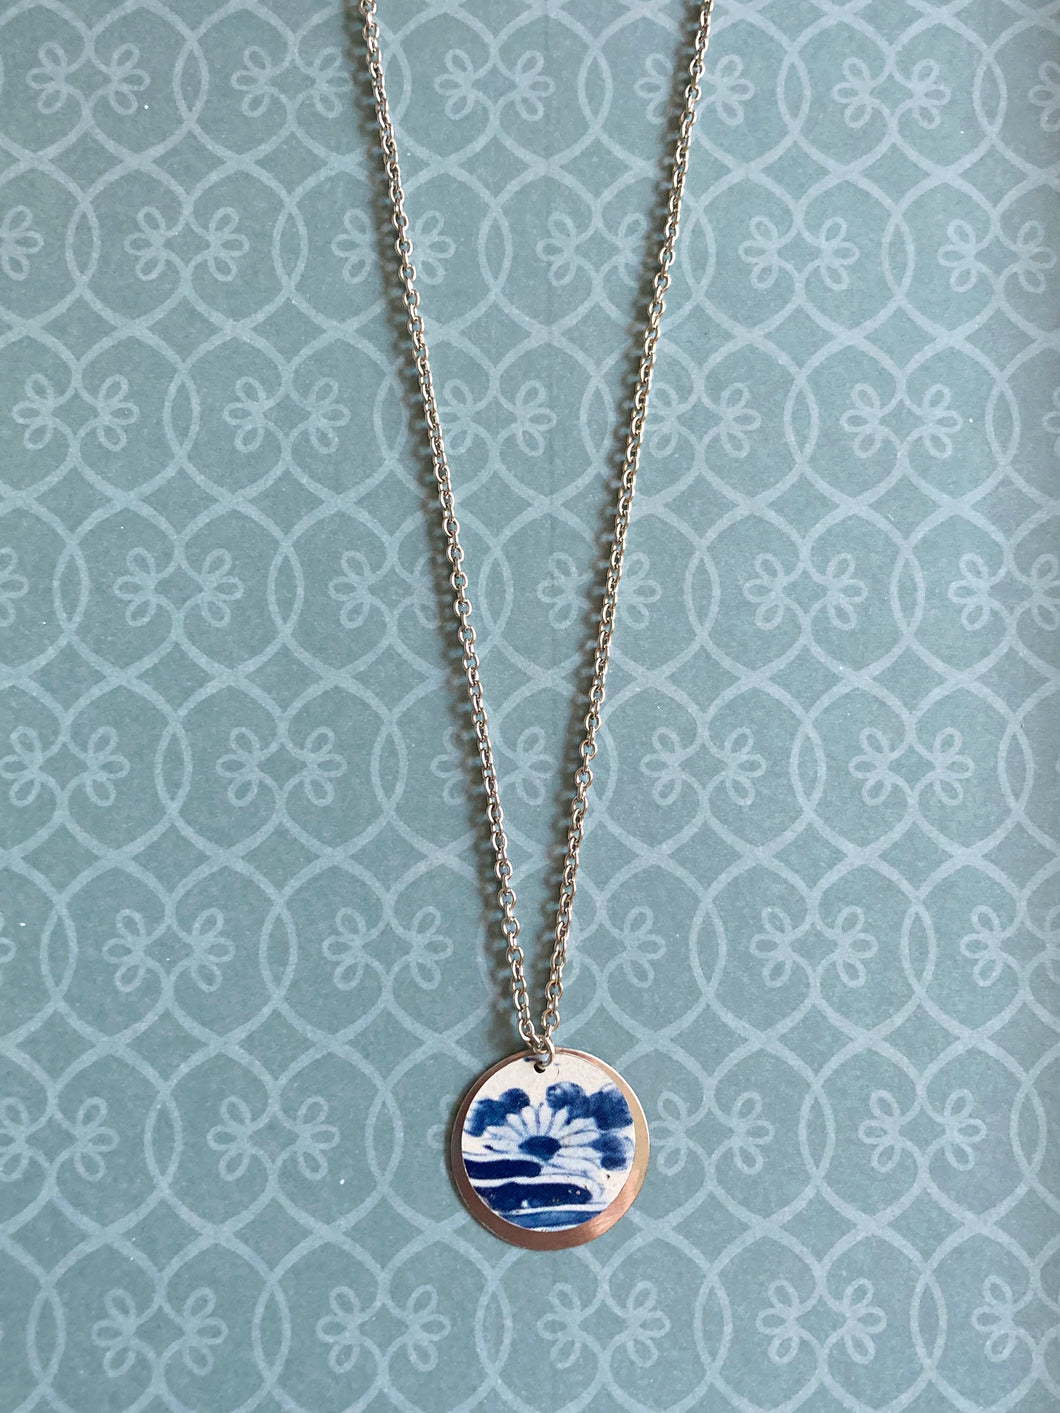 Blue and White Circle Necklace